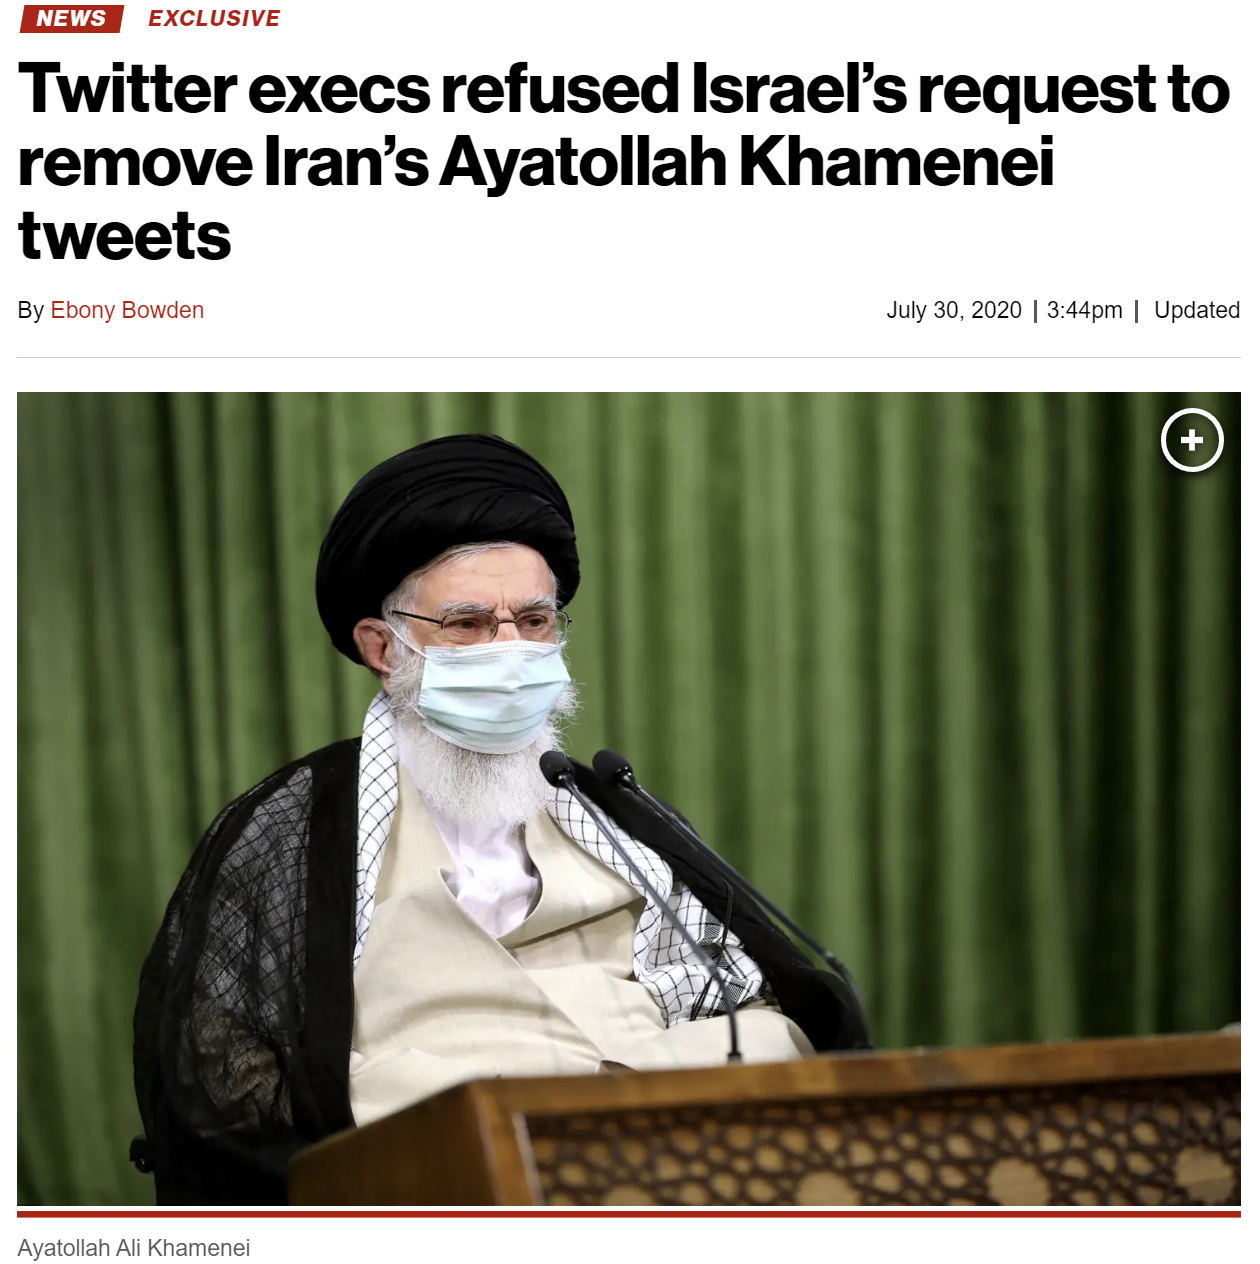 A New York Post article about Iran's Ayatollah and Twitter's refusal to ban his account